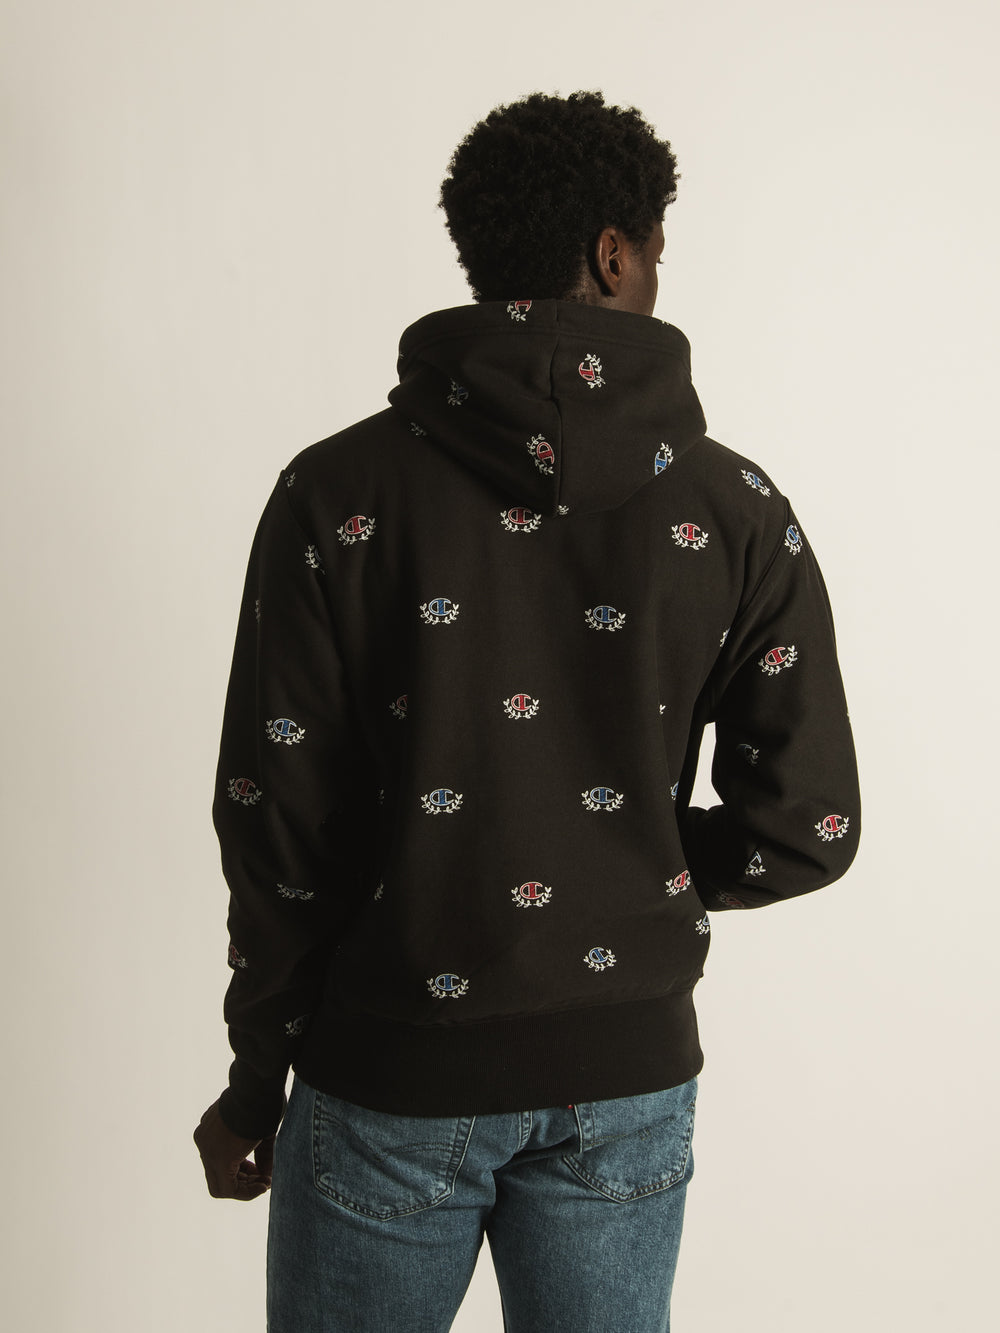 CHAMPION REVERSE WEAVE ALL OVER PRINT HOODIE - CLEARANCE